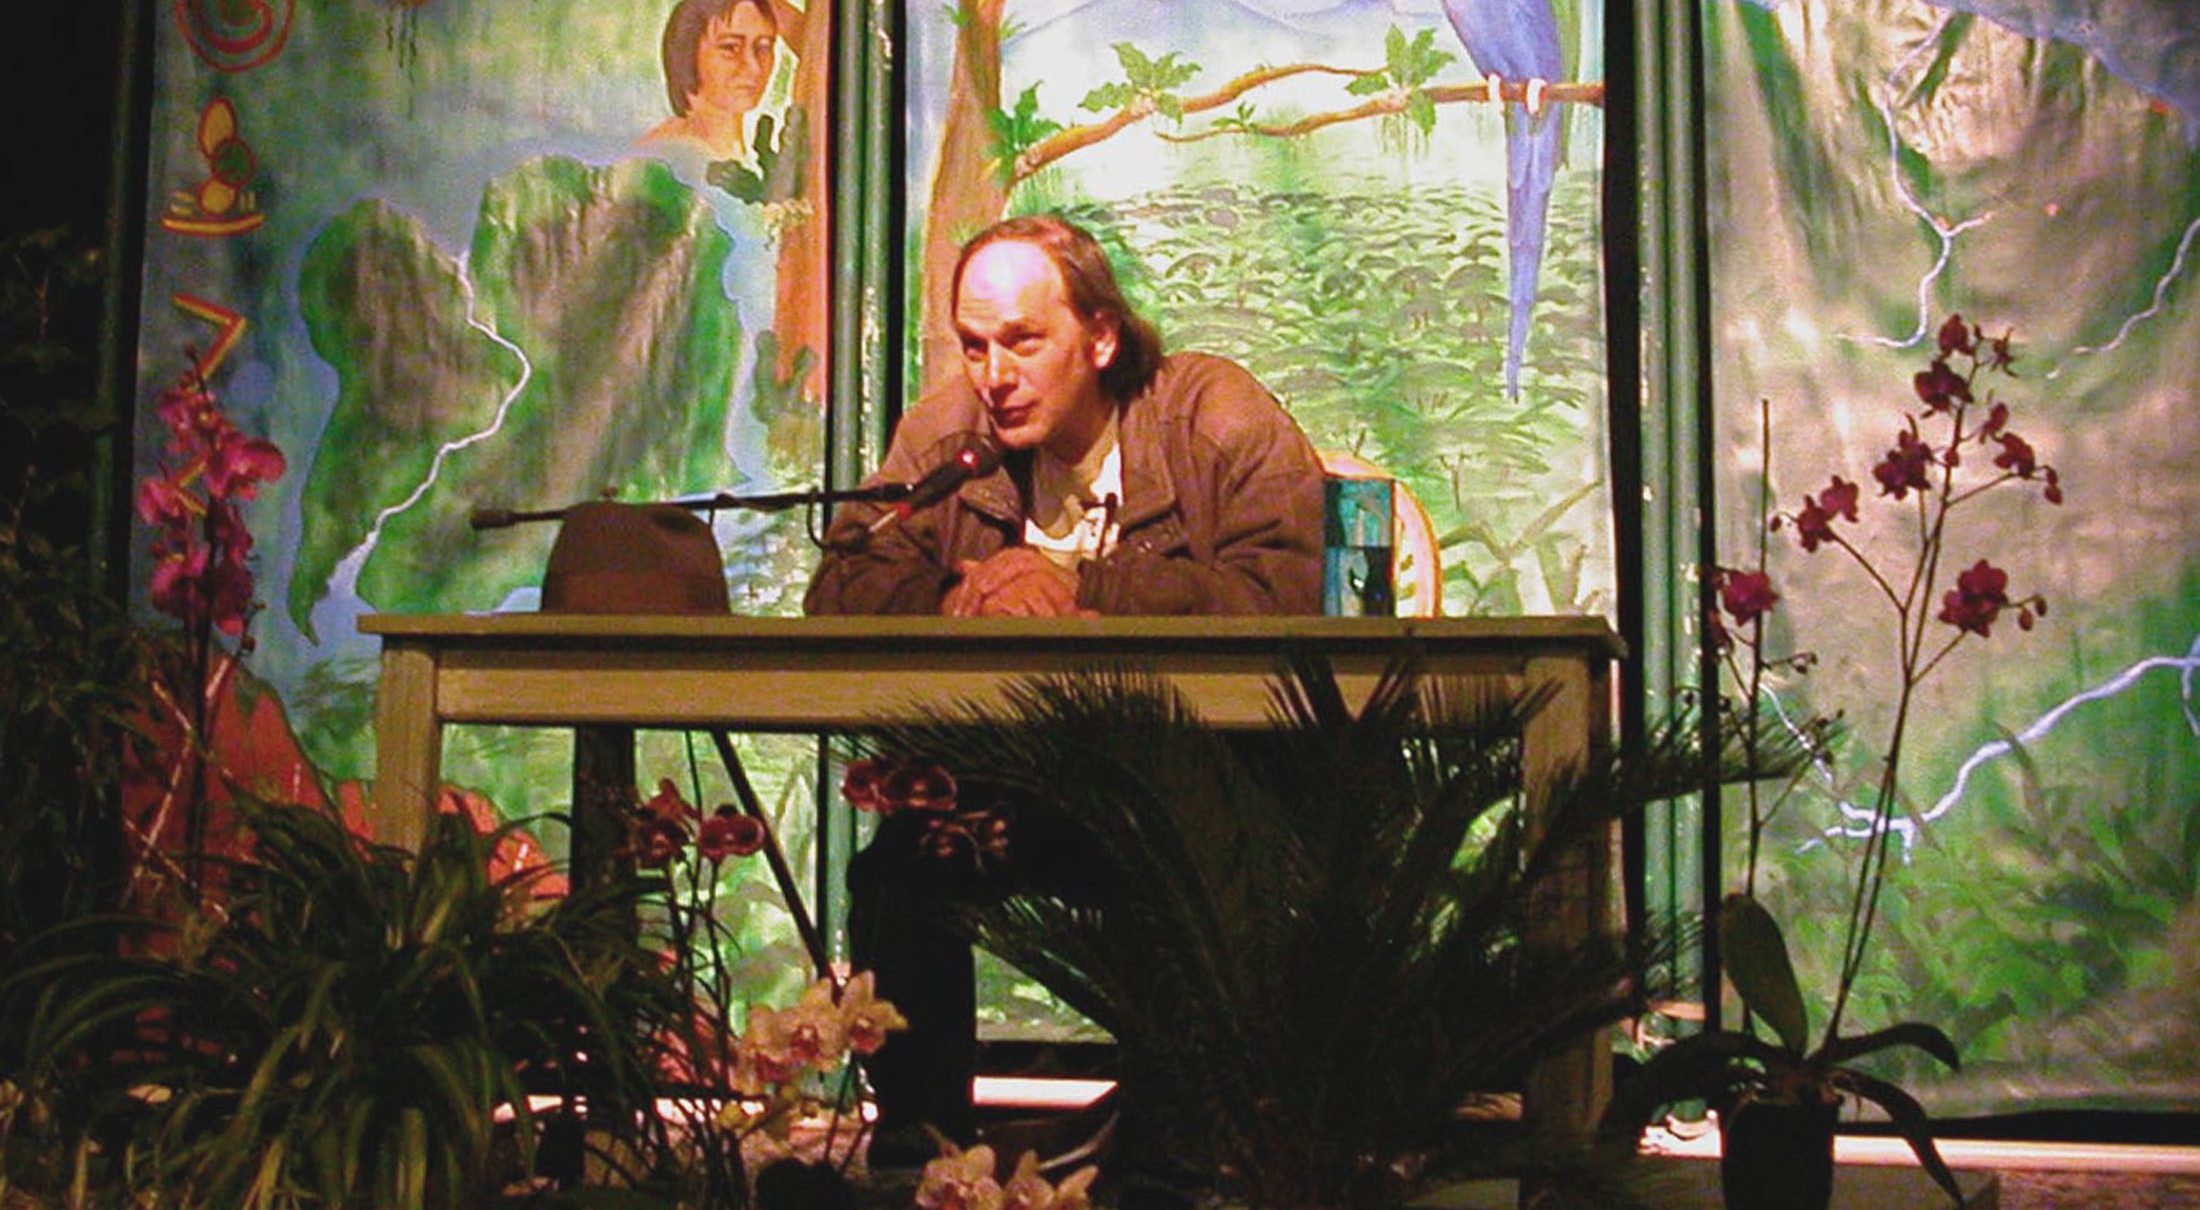 A man sitting at a table in front of a painting.